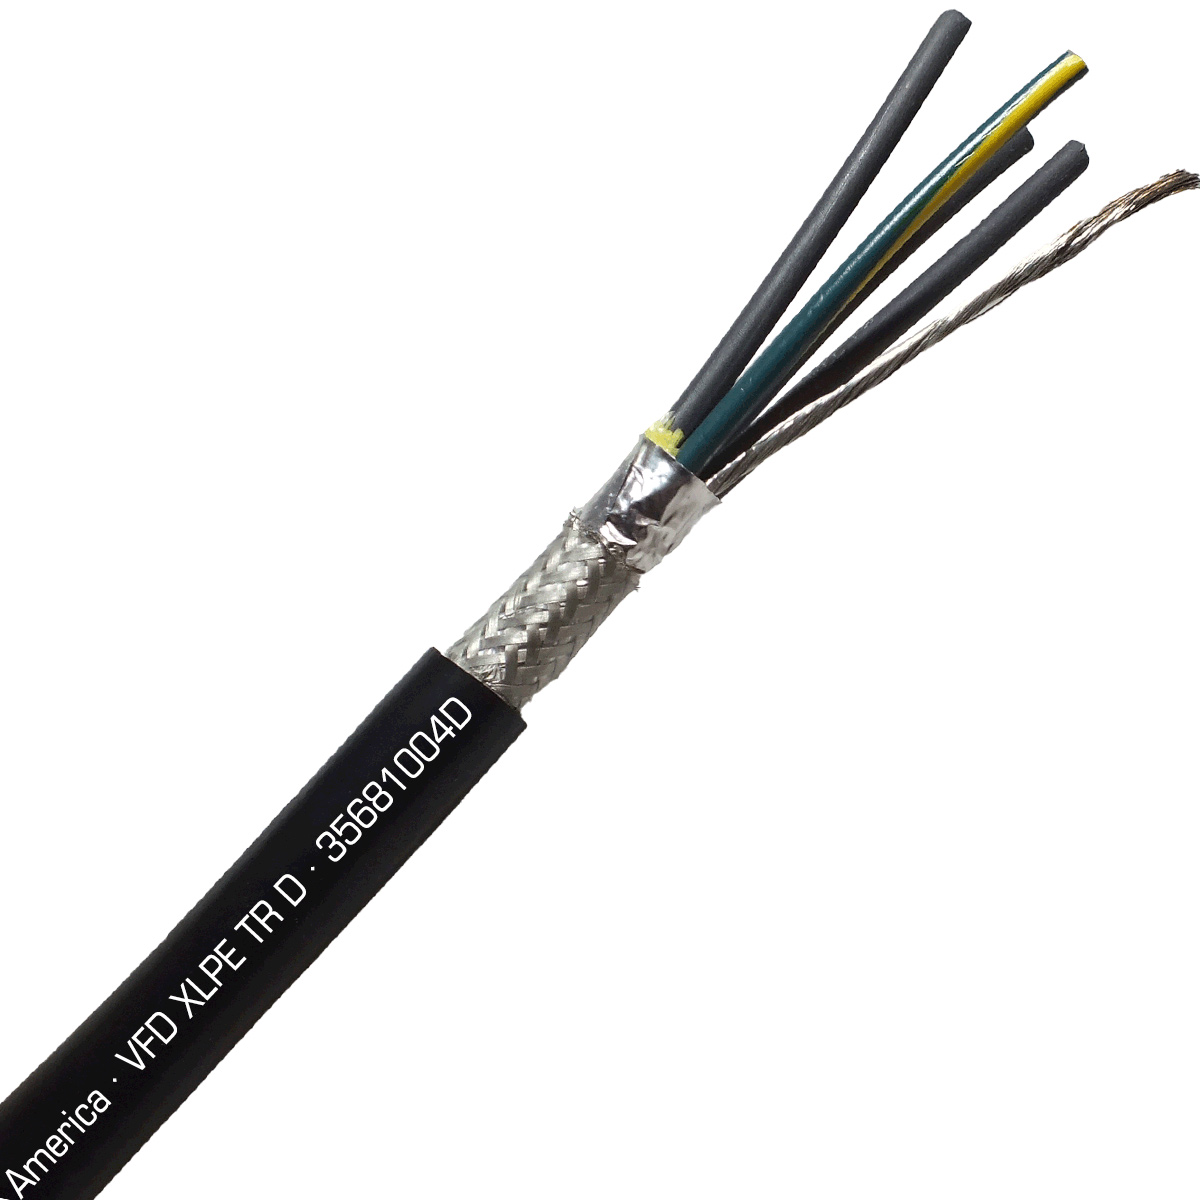 VFD Control Cable, 10 AWG, XLPE Insulated, PVC Jacket, Black